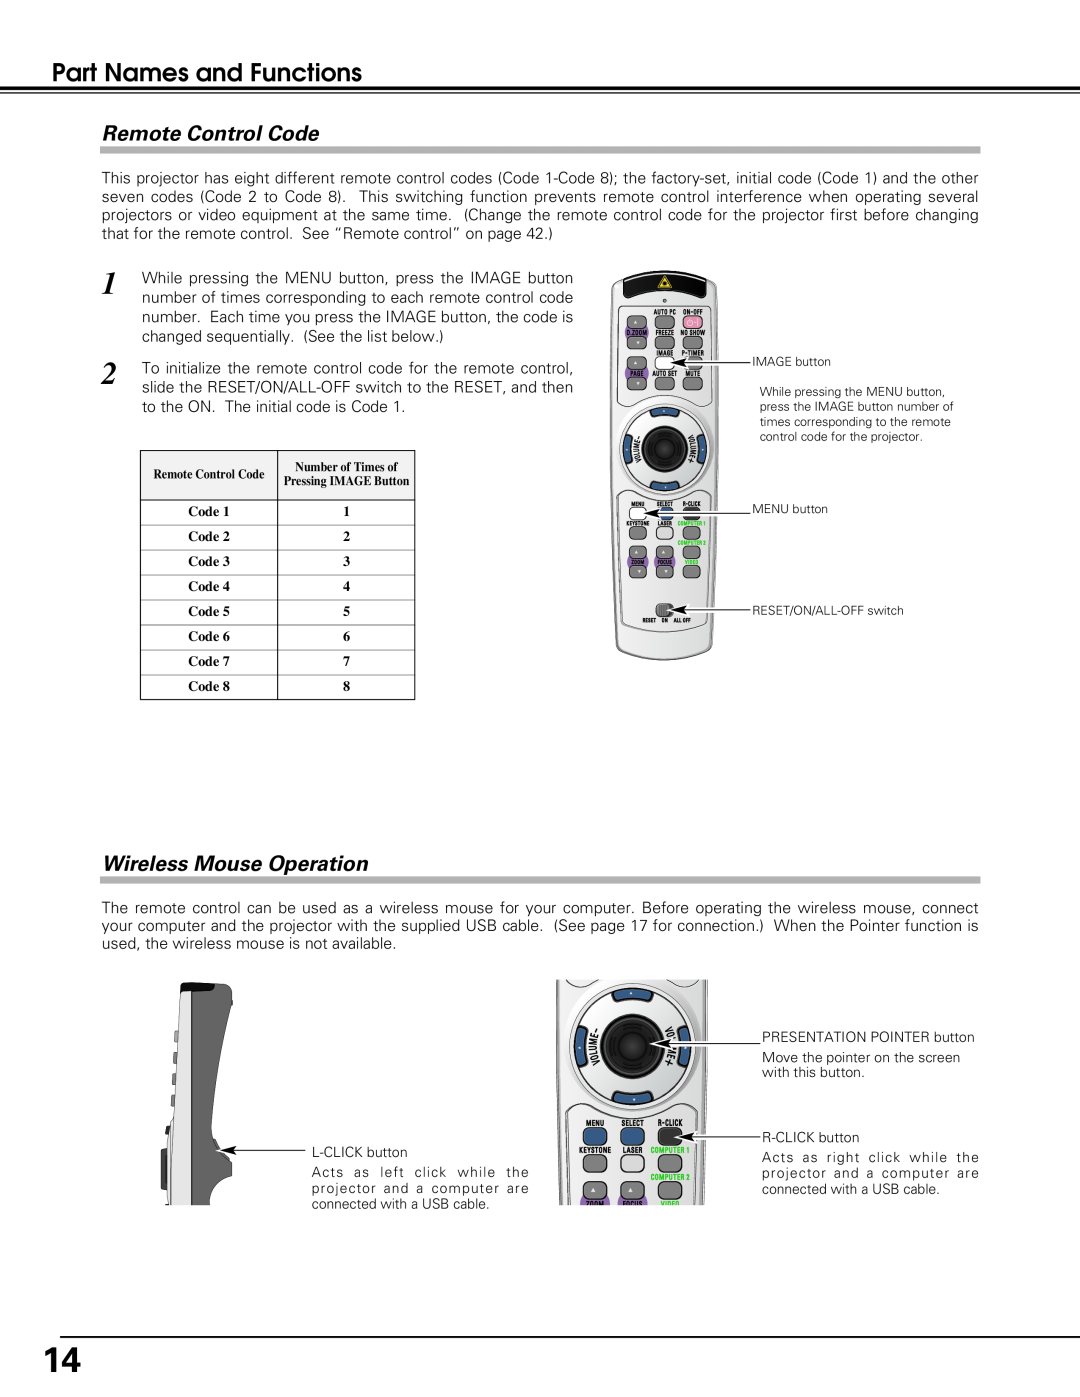 Eiki LC-XE10 Remote Control Code, Wireless Mouse Operation, Part Names and Functions, to the ON. The initial code is Code 